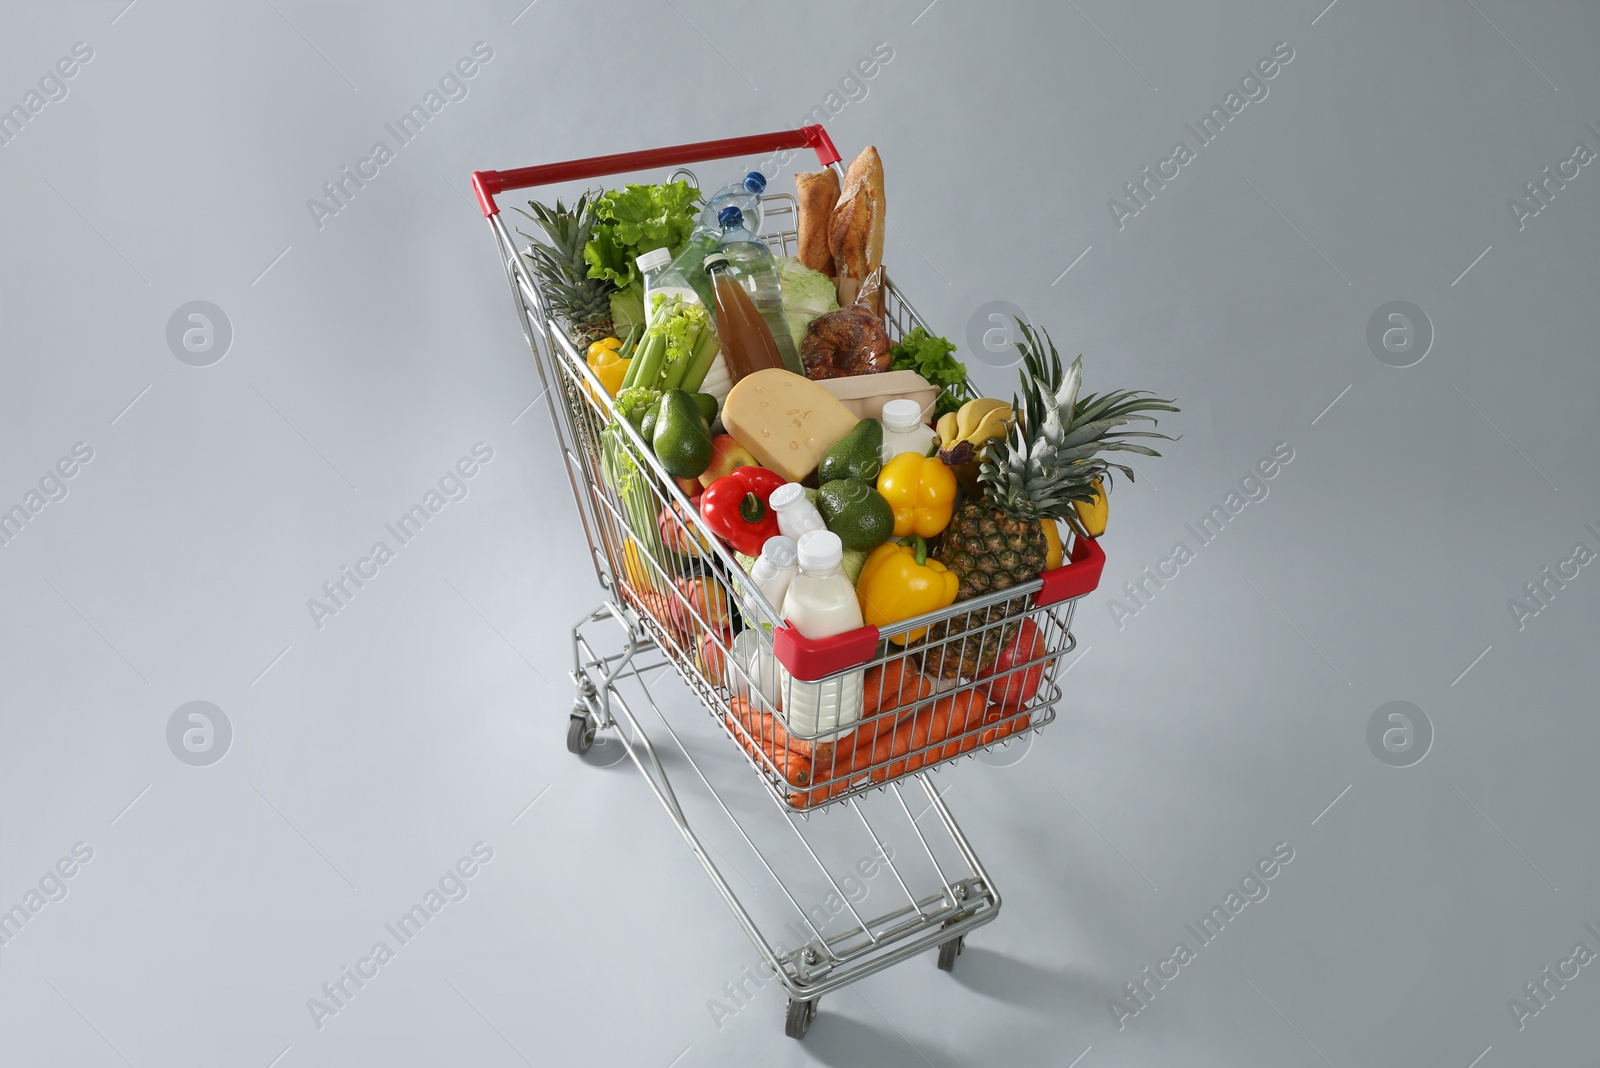 Photo of Shopping cart full of groceries on grey background